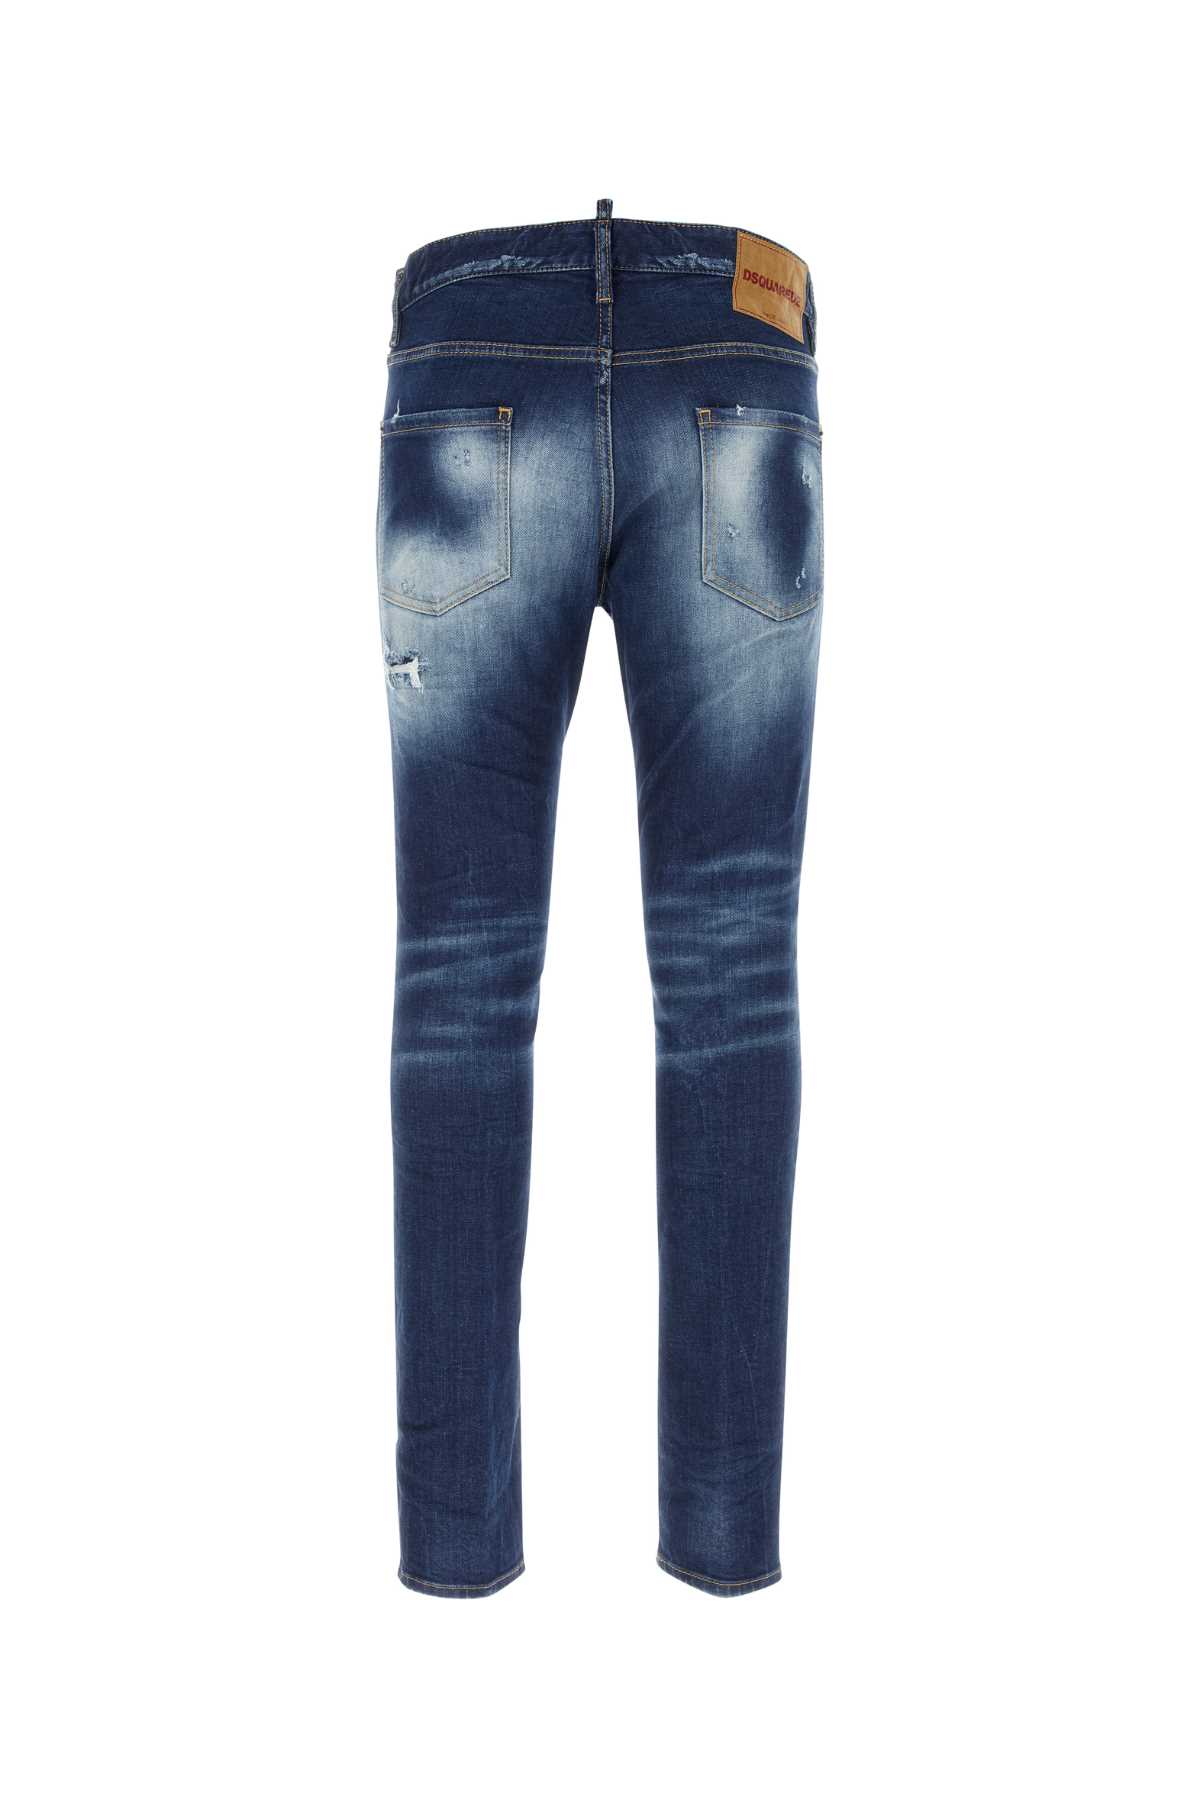 Dsquared2 Stretch Denim Cool Guy Jeans In Navyblue